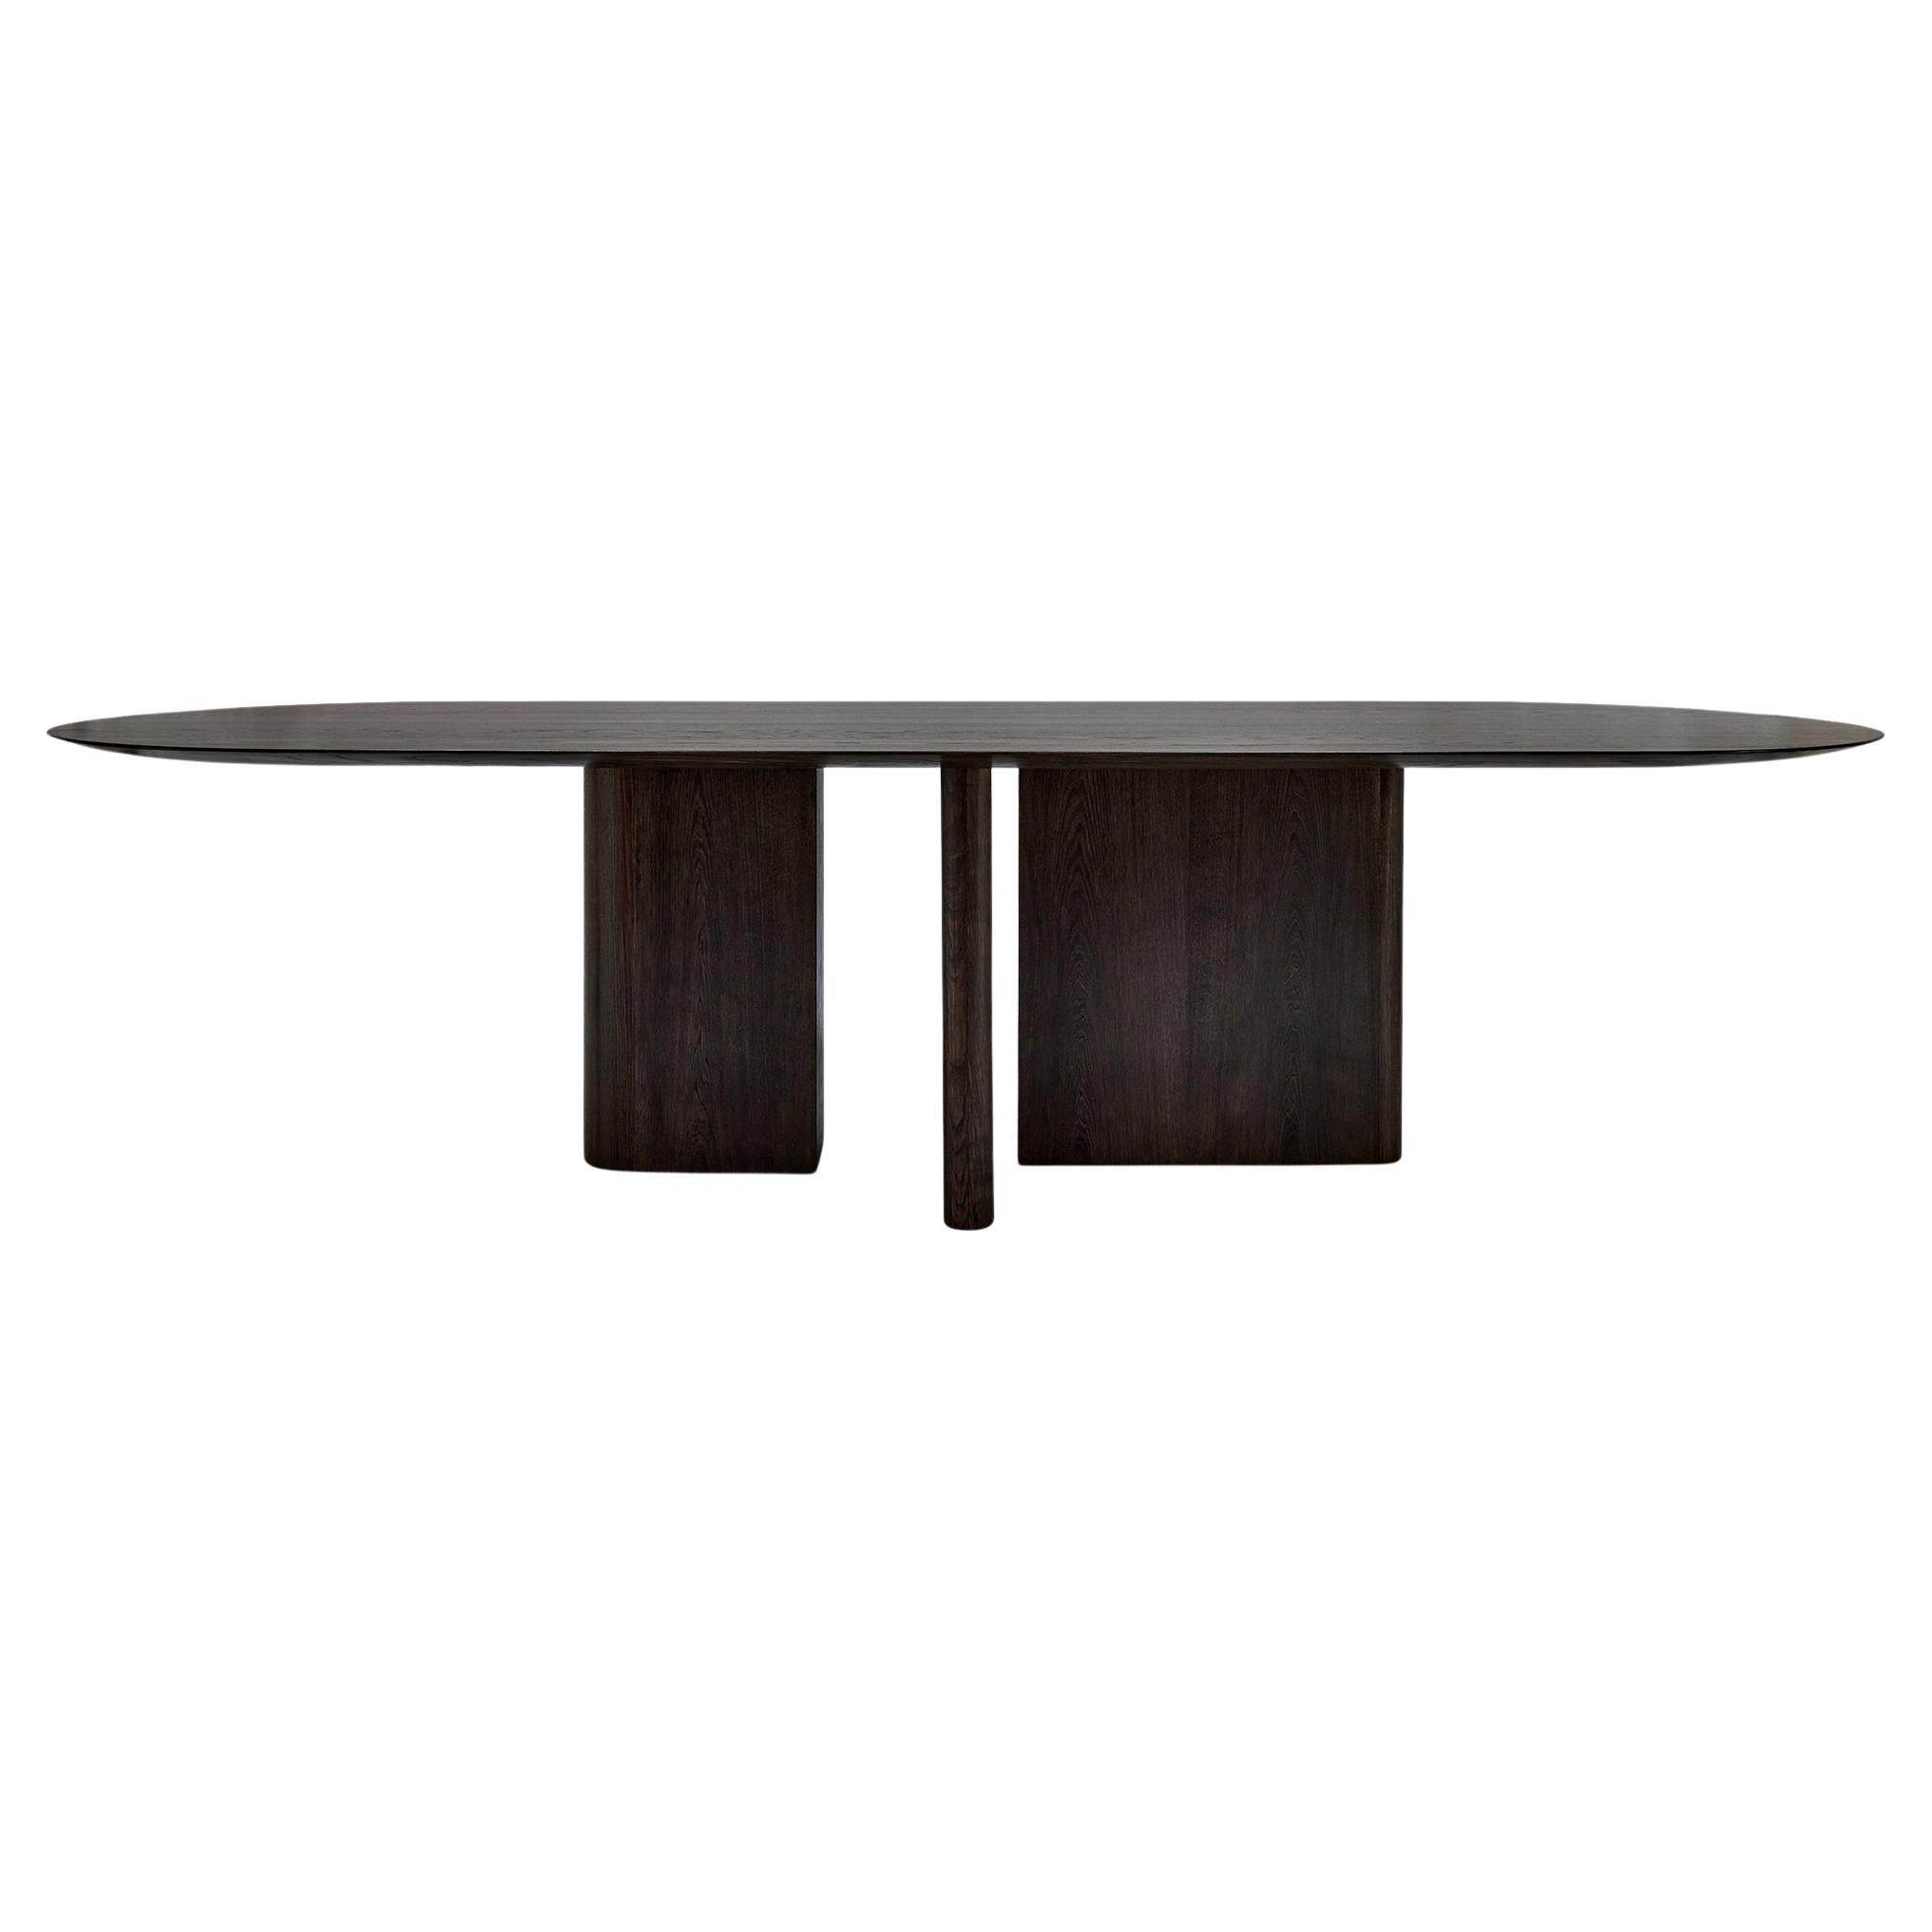 MG210 Dining Table in Dark Nature oak by Malte Gormsen design by Norm Architects For Sale